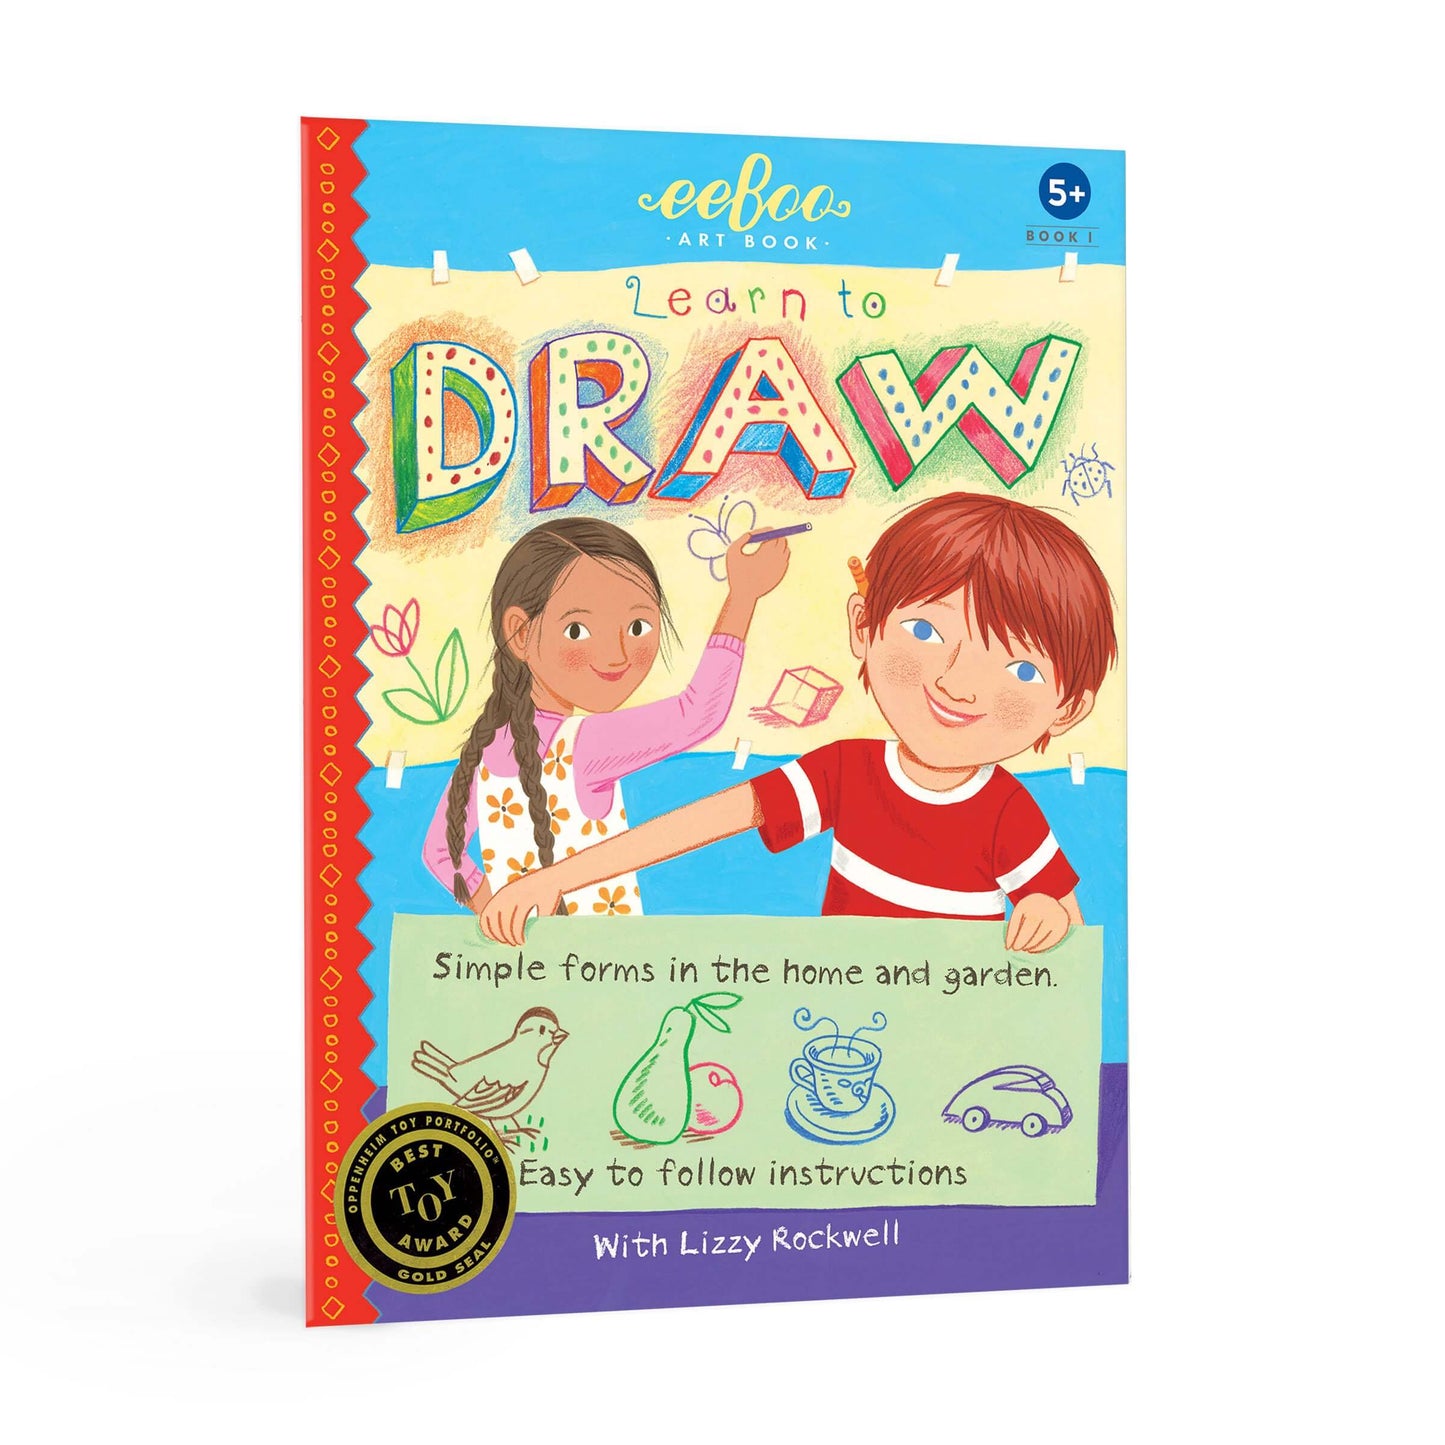 Learn to Draw Simple Forms with Lizzy Rockwell by eeBoo Kids Eeboo Prettycleanshop